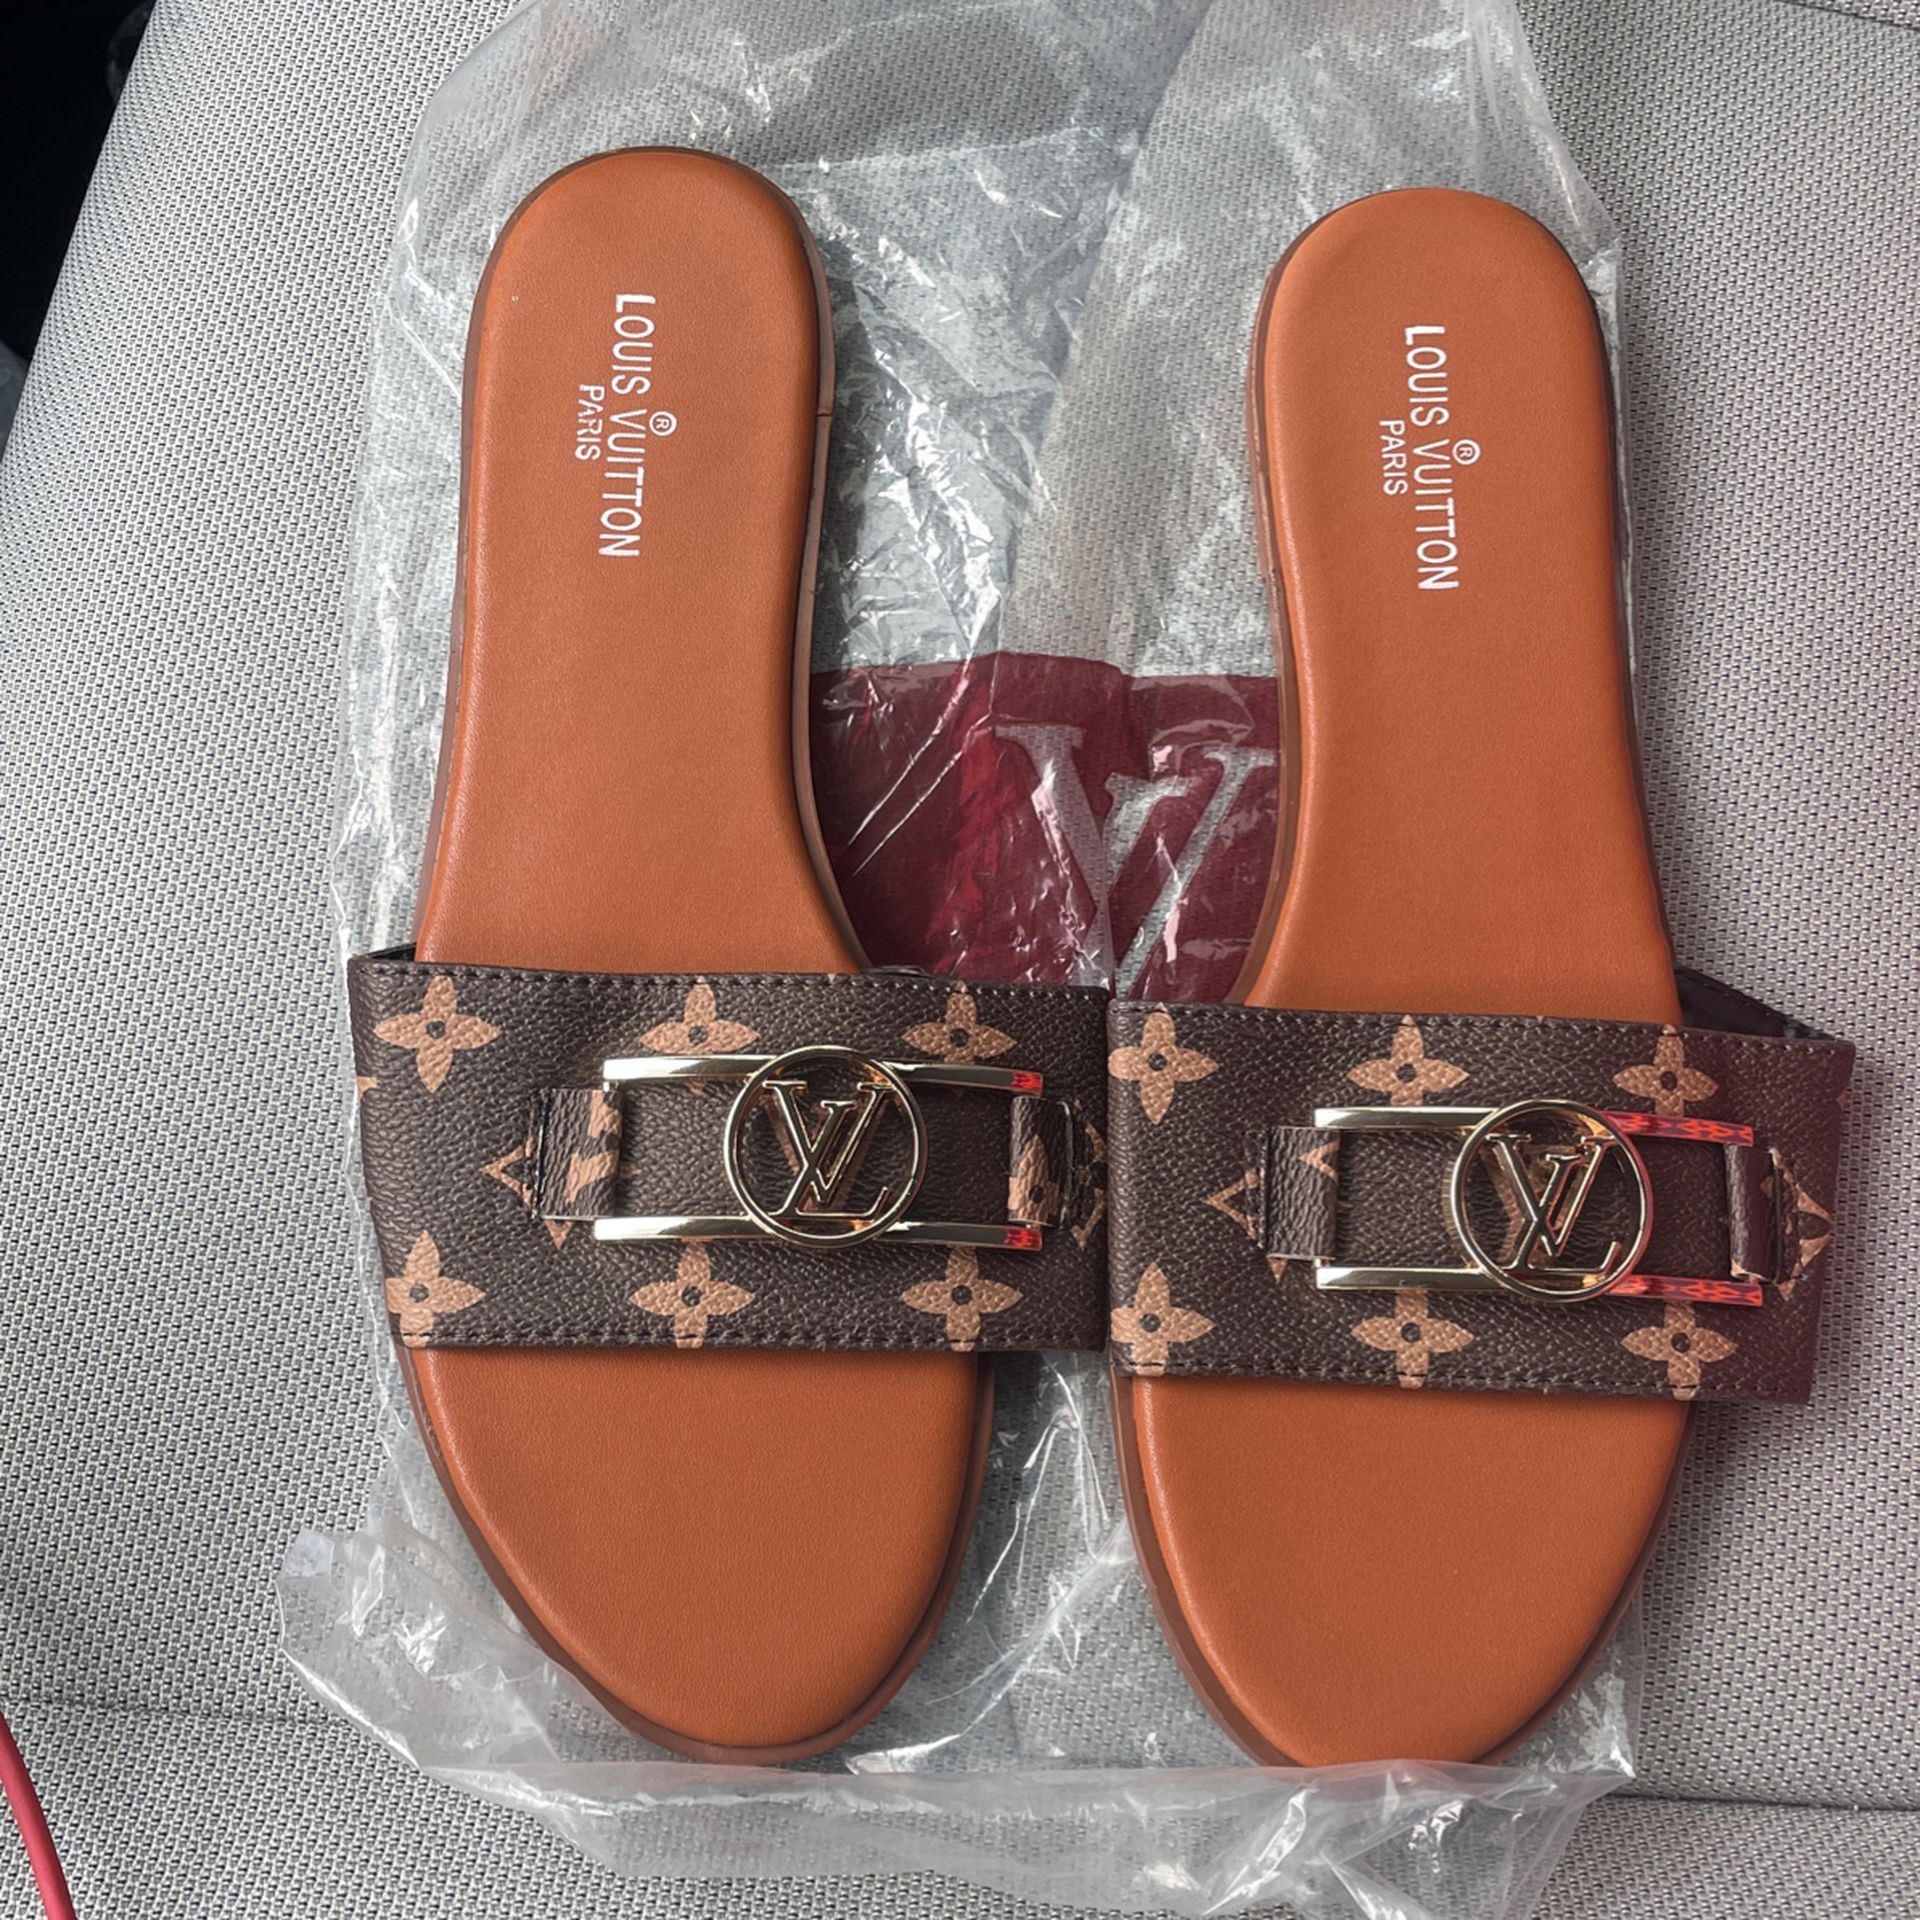 Forebyggelse element Teenager Louis Vuitton Sandals for Sale in Fort Lauderdale, FL - OfferUp